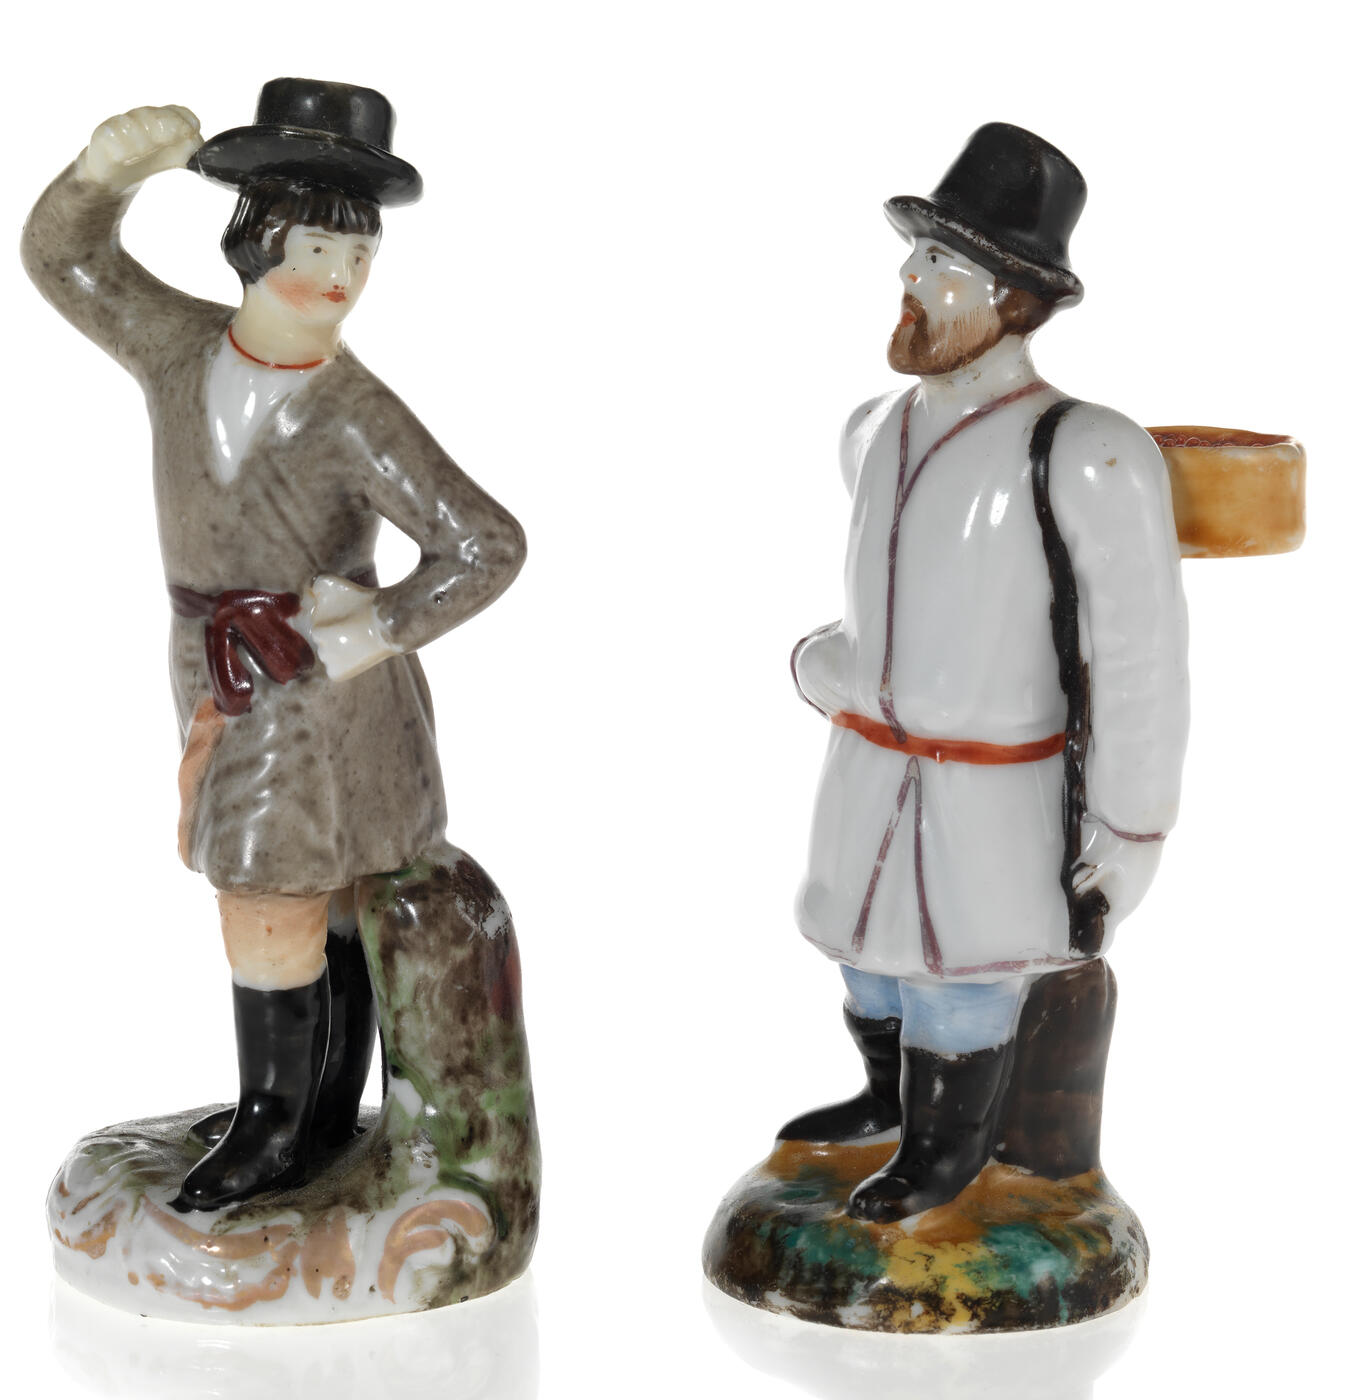 Two Small Figurines of a Dancing Peasant and a Traveller with a Basket of Berries